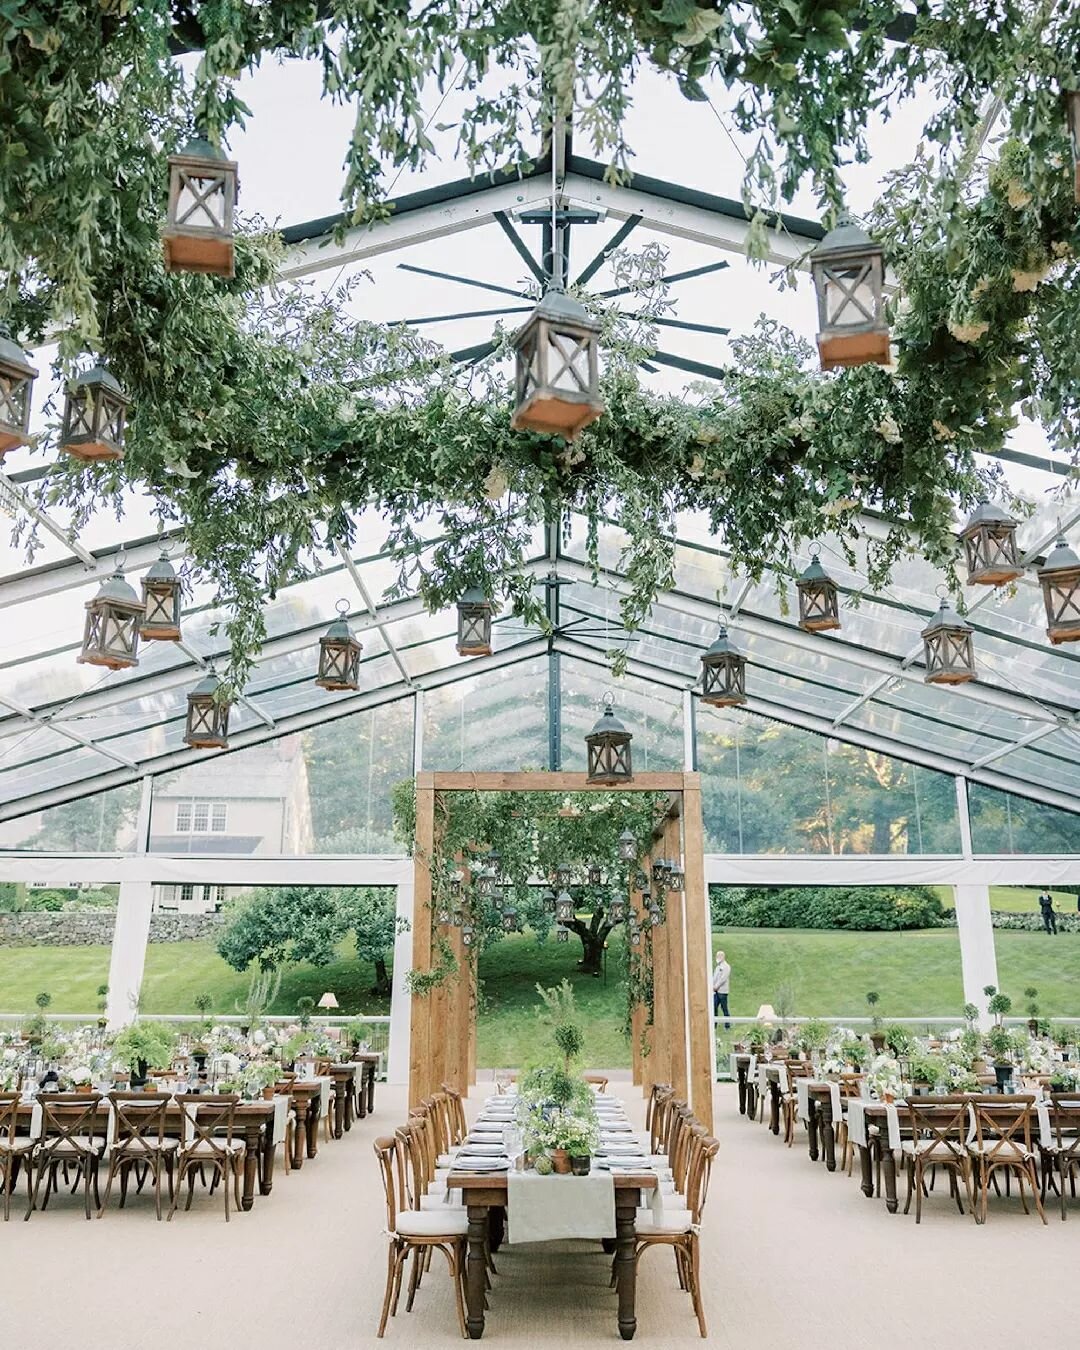 Aerial greens ✅&nbsp;Tabletop greens ✅&nbsp;Nature's greens ✅. The trifecta is complete!&nbsp;

​Planning + Creative Direction: @amandasavoryevents
​Designer and Production: @davidbeahm
​Venue: Private Estate
​Photography: @edward_winter for @readylu